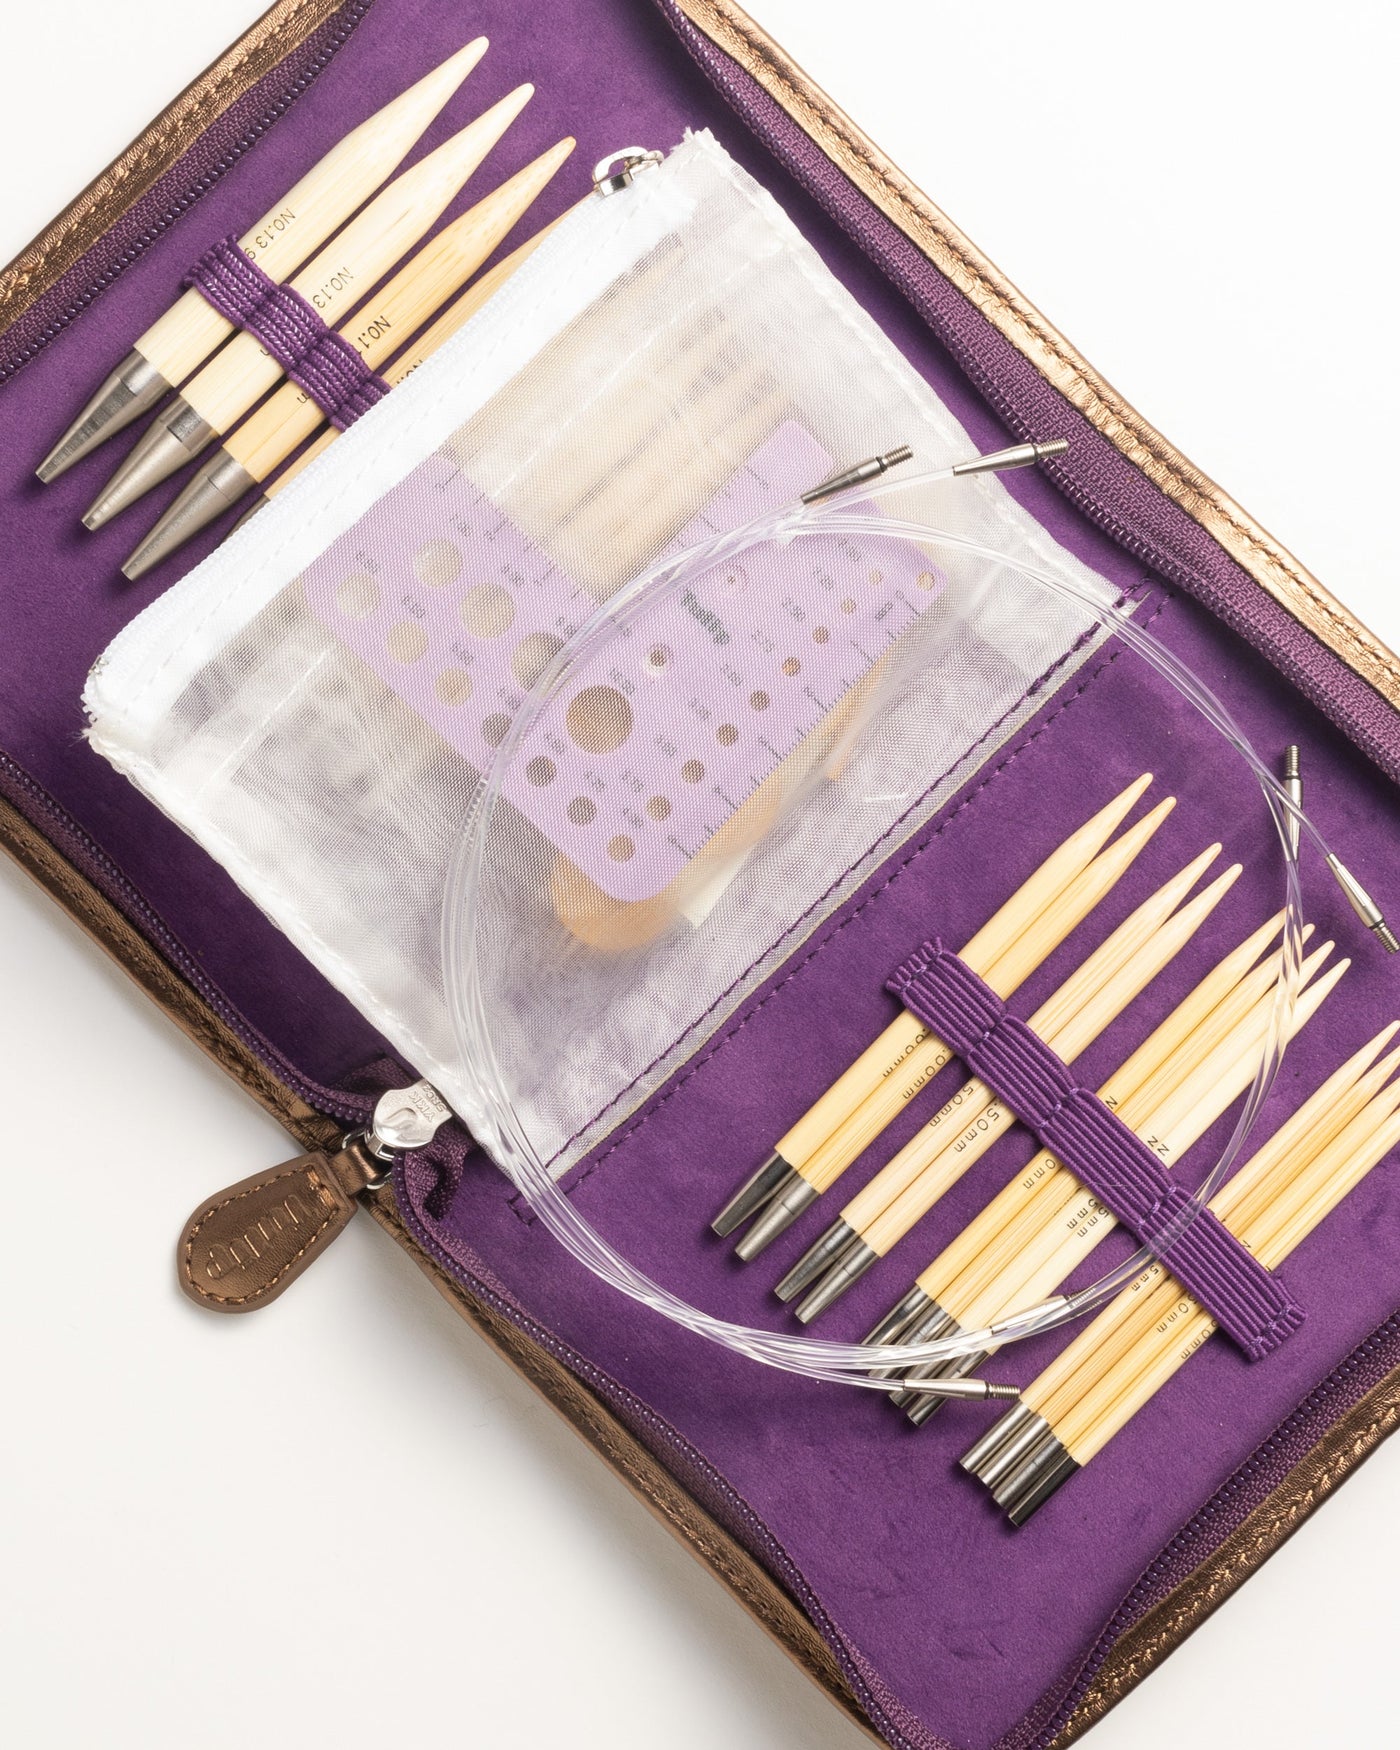 Double Ended Bamboo Knitting Needles Set, For Beginners And Professionals,  80 Pieces (16 Sizes X 5 Units), 2mm To 12mm, 25cm, With Canvas Storage Bag